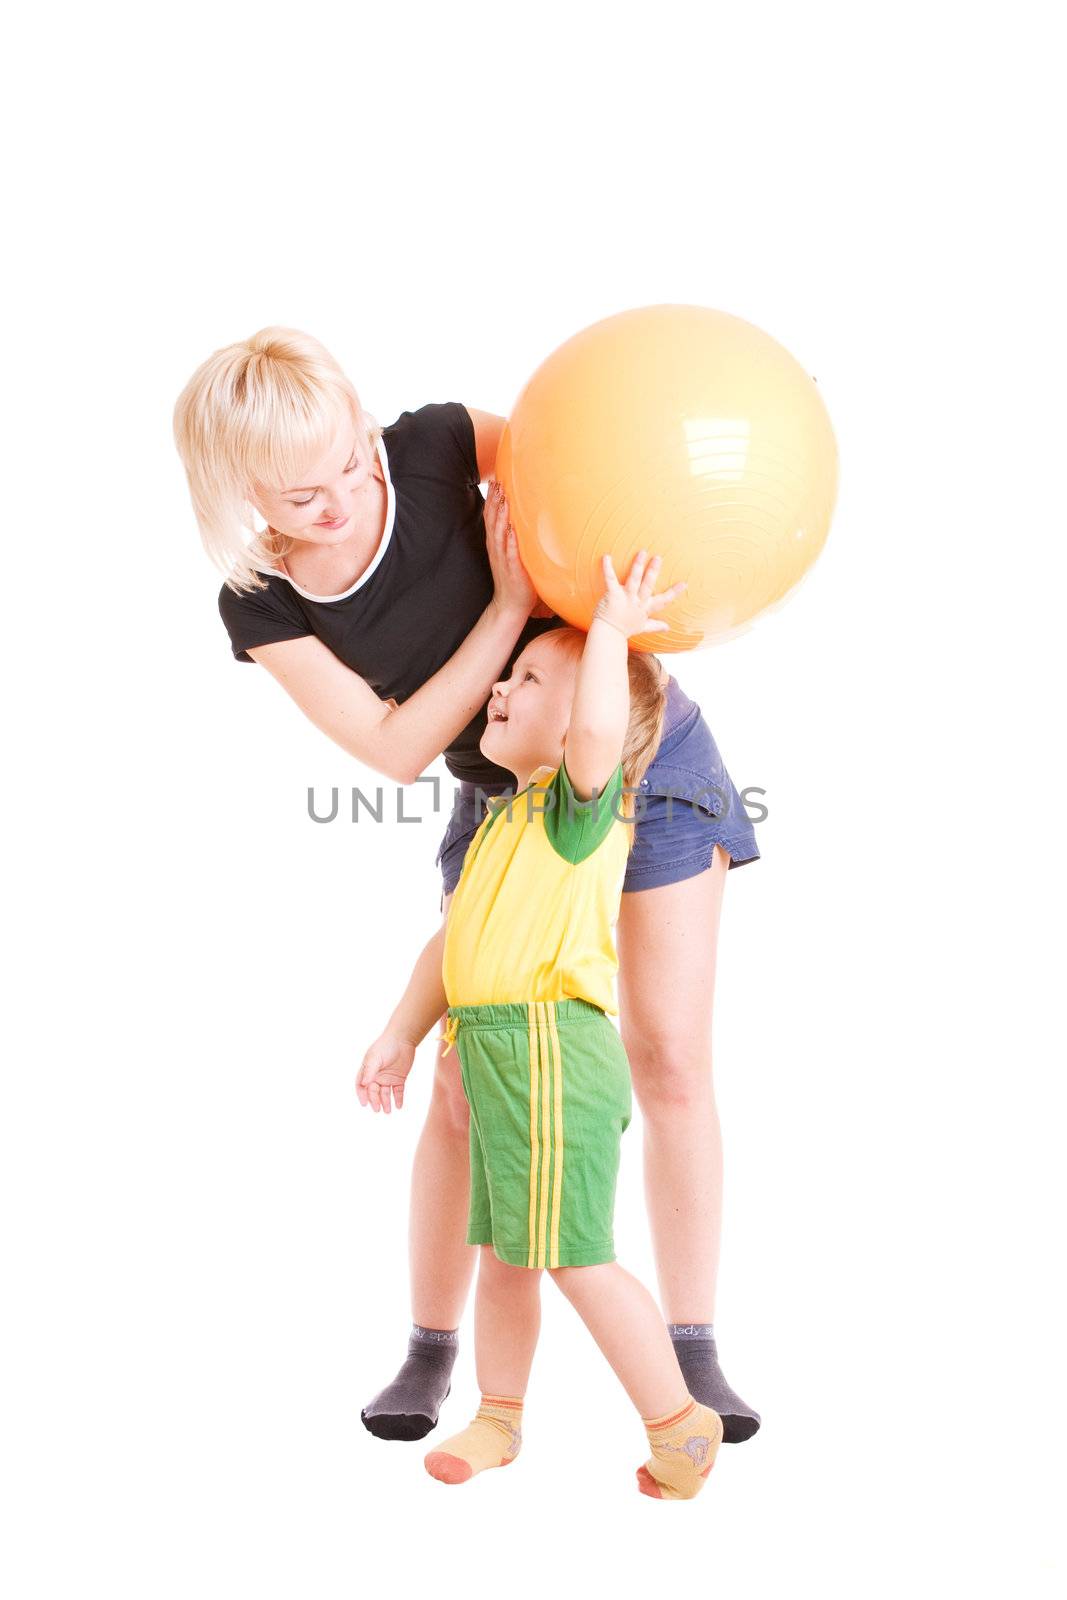 mother and her son with a fitness ball in their hands by vsurkov